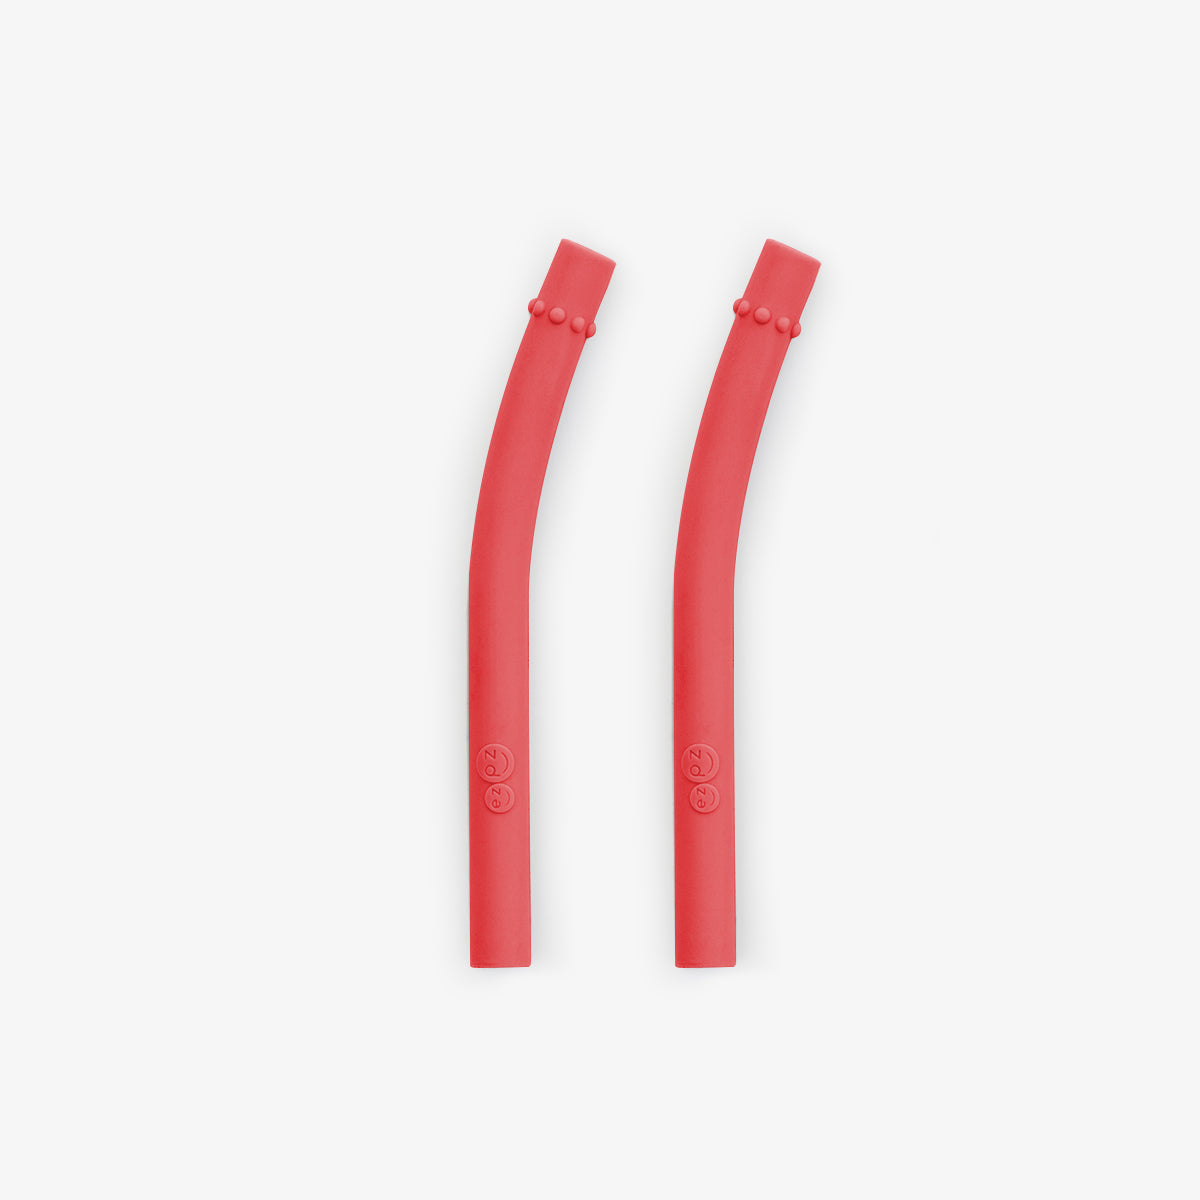 Replacement Straws for 8.5 oz, 12 oz, 20 oz Kids Cups (Pack of 2)